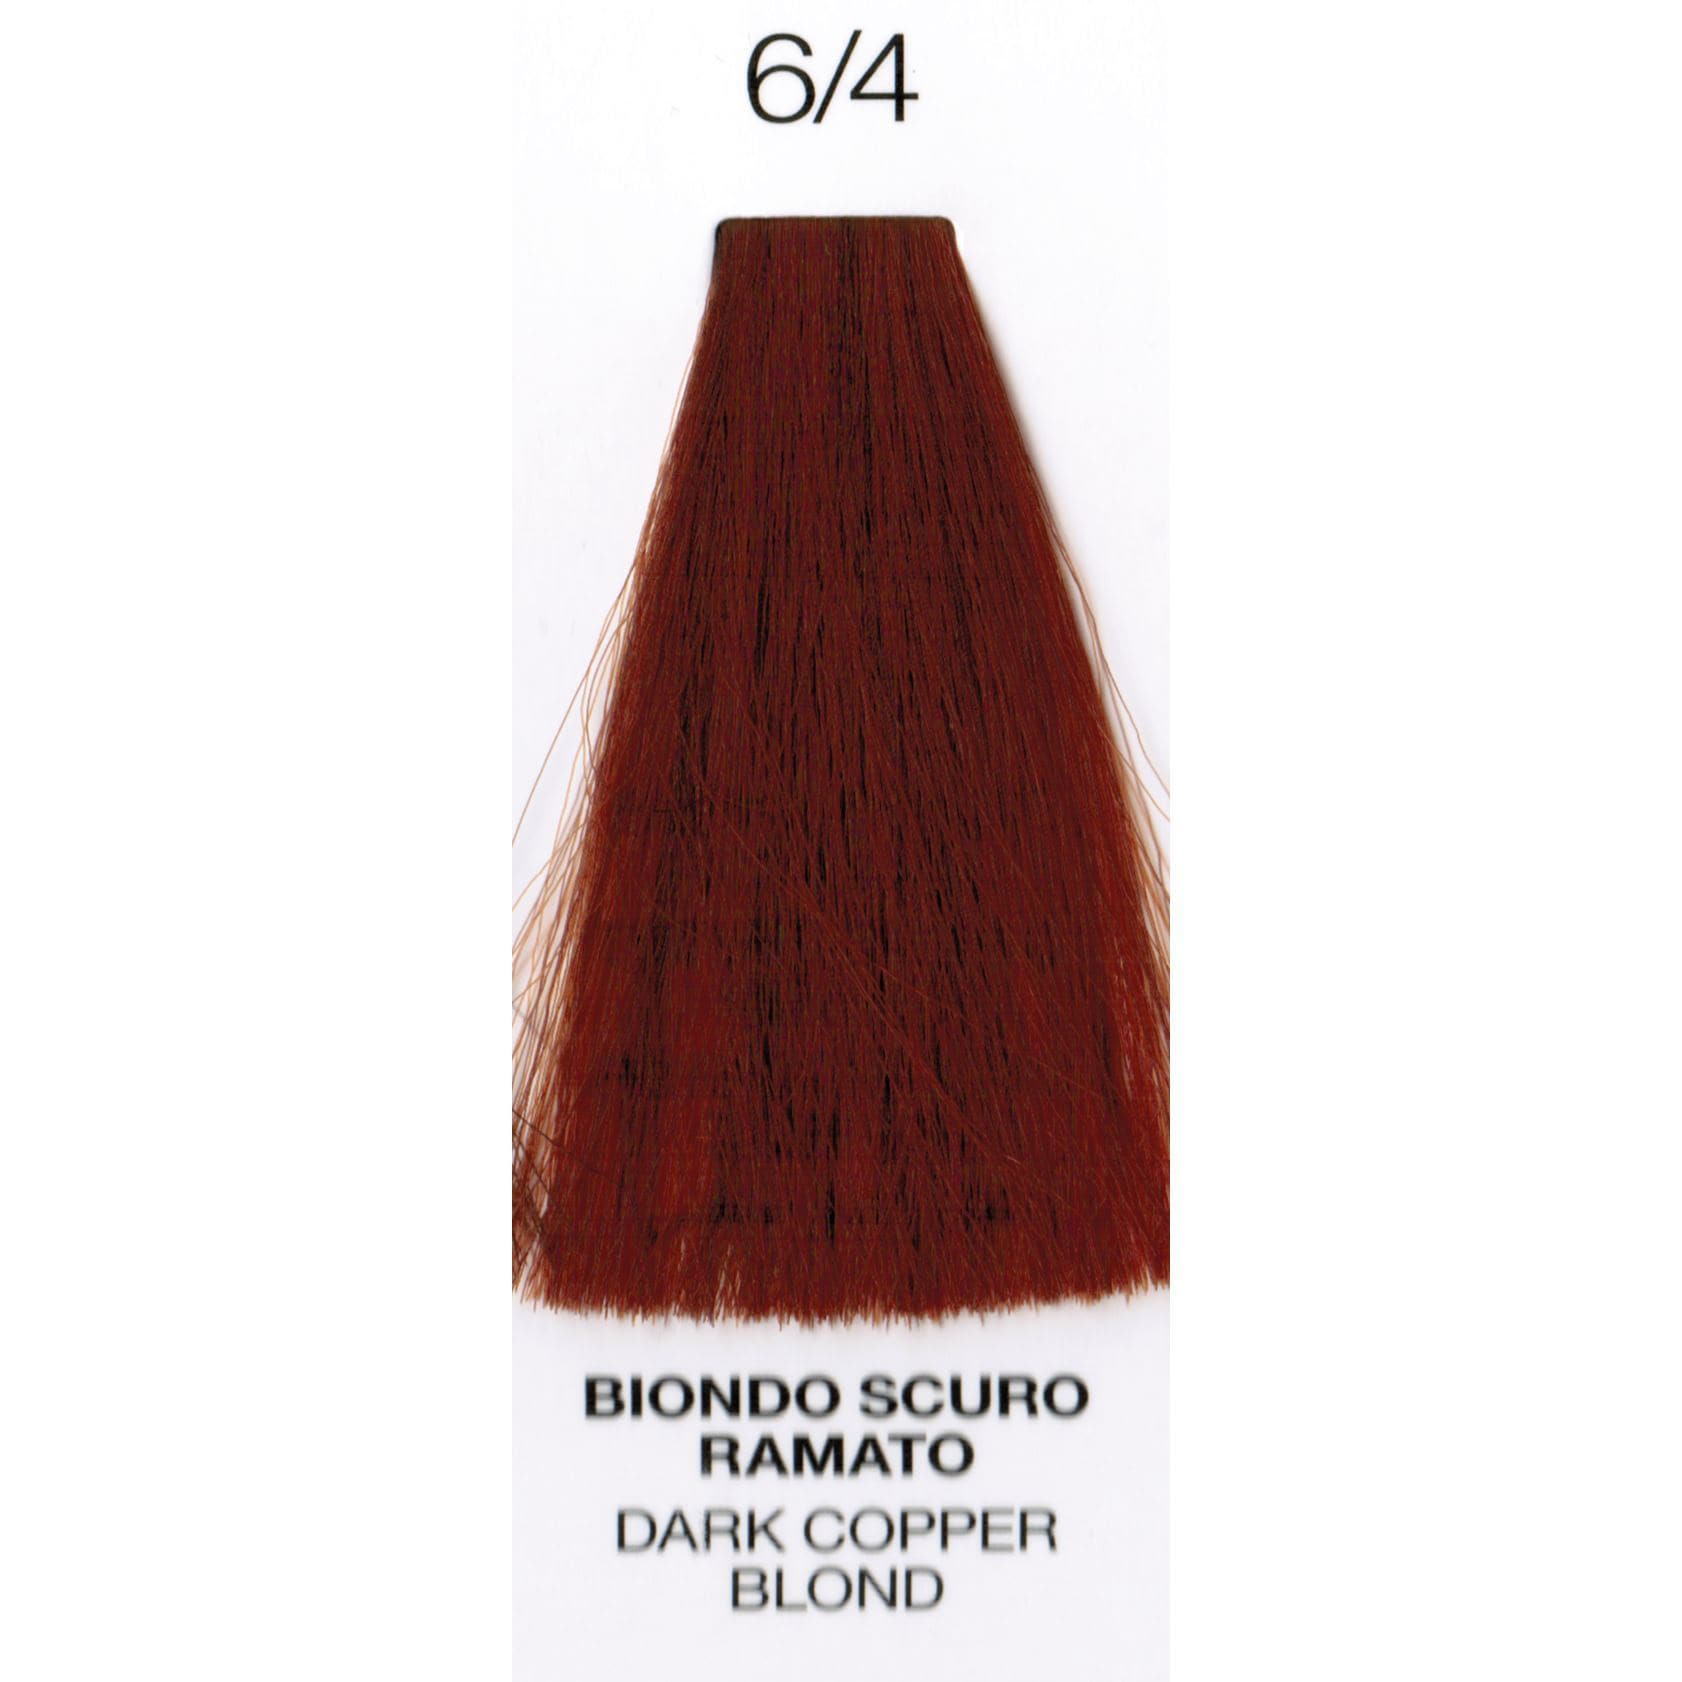 6/4 Dark Copper Blonde | Purity | Ammonia-Free Permanent Hair Color HAIR COLOR OYSTER 